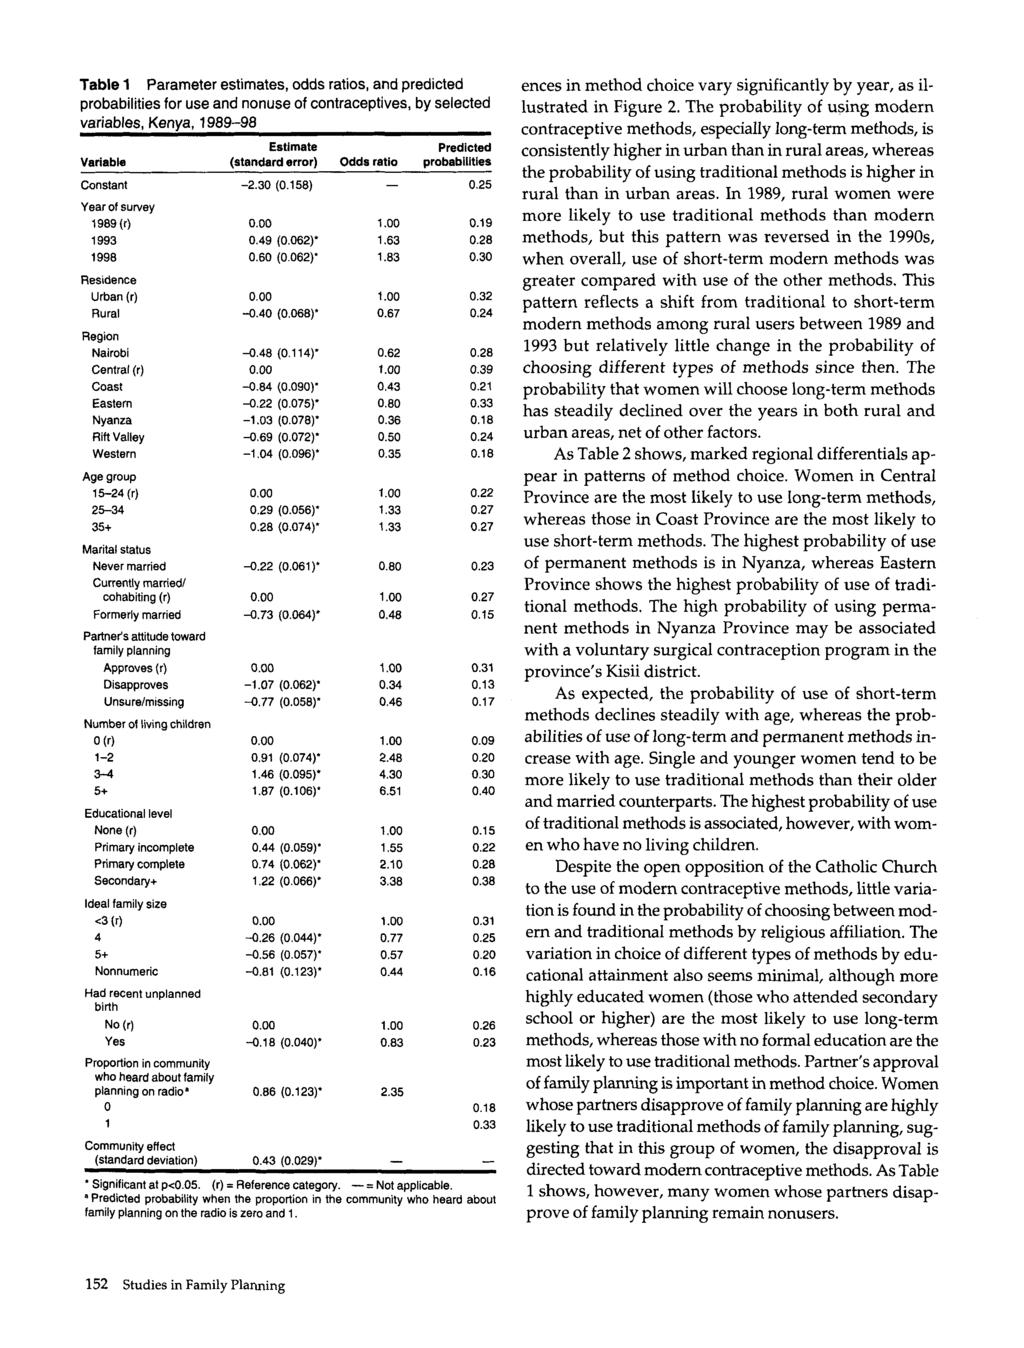 Table 1 Parameter estimates, odds ratios, and predicted probabilities for use and nonuse of contraceptives, by selected variables, Kenya, 1989-98 Estimate Predicted Variable (standard error) Odds